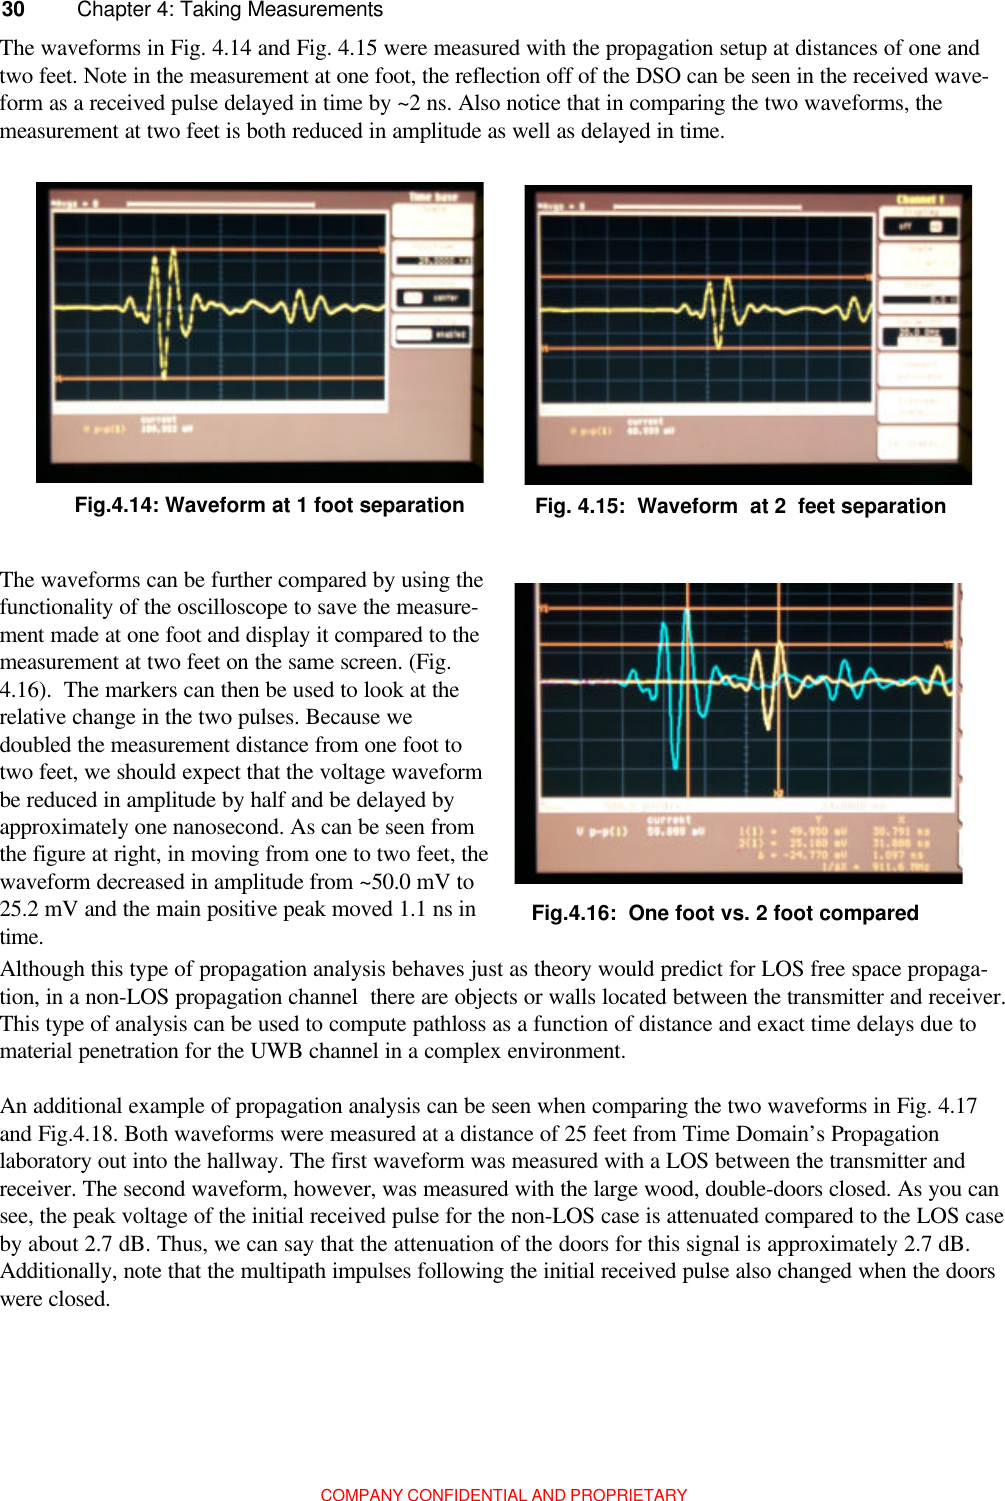 COMPANY CONFIDENTIAL AND PROPRIETARY30 Chapter 4: Taking MeasurementsThe waveforms in Fig. 4.14 and Fig. 4.15 were measured with the propagation setup at distances of one andtwo feet. Note in the measurement at one foot, the reflection off of the DSO can be seen in the received wave-form as a received pulse delayed in time by ~2 ns. Also notice that in comparing the two waveforms, themeasurement at two feet is both reduced in amplitude as well as delayed in time.The waveforms can be further compared by using thefunctionality of the oscilloscope to save the measure-ment made at one foot and display it compared to themeasurement at two feet on the same screen. (Fig.4.16).  The markers can then be used to look at therelative change in the two pulses. Because wedoubled the measurement distance from one foot totwo feet, we should expect that the voltage waveformbe reduced in amplitude by half and be delayed byapproximately one nanosecond. As can be seen fromthe figure at right, in moving from one to two feet, thewaveform decreased in amplitude from ~50.0 mV to25.2 mV and the main positive peak moved 1.1 ns intime.Although this type of propagation analysis behaves just as theory would predict for LOS free space propaga-tion, in a non-LOS propagation channel  there are objects or walls located between the transmitter and receiver.This type of analysis can be used to compute pathloss as a function of distance and exact time delays due tomaterial penetration for the UWB channel in a complex environment.An additional example of propagation analysis can be seen when comparing the two waveforms in Fig. 4.17and Fig.4.18. Both waveforms were measured at a distance of 25 feet from Time Domain’s Propagationlaboratory out into the hallway. The first waveform was measured with a LOS between the transmitter andreceiver. The second waveform, however, was measured with the large wood, double-doors closed. As you cansee, the peak voltage of the initial received pulse for the non-LOS case is attenuated compared to the LOS caseby about 2.7 dB. Thus, we can say that the attenuation of the doors for this signal is approximately 2.7 dB.Additionally, note that the multipath impulses following the initial received pulse also changed when the doorswere closed.Fig.4.14: Waveform at 1 foot separation Fig. 4.15:  Waveform  at 2  feet separationFig.4.16:  One foot vs. 2 foot compared